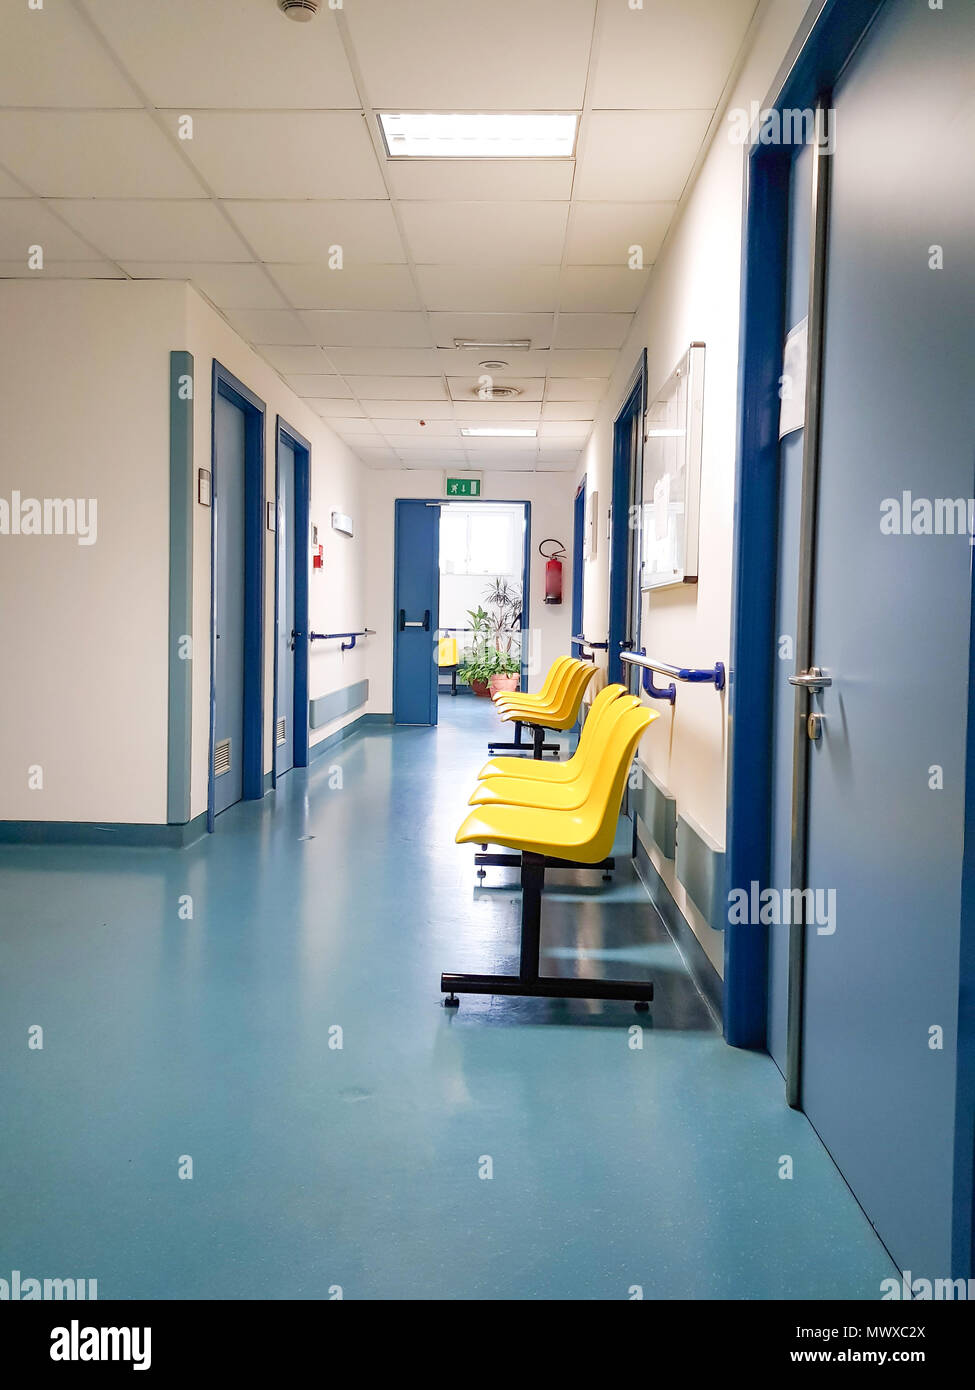 Chairs in the hospital hallway, hospital interior, Empty chairs for waiting in hospital. Stock Photo